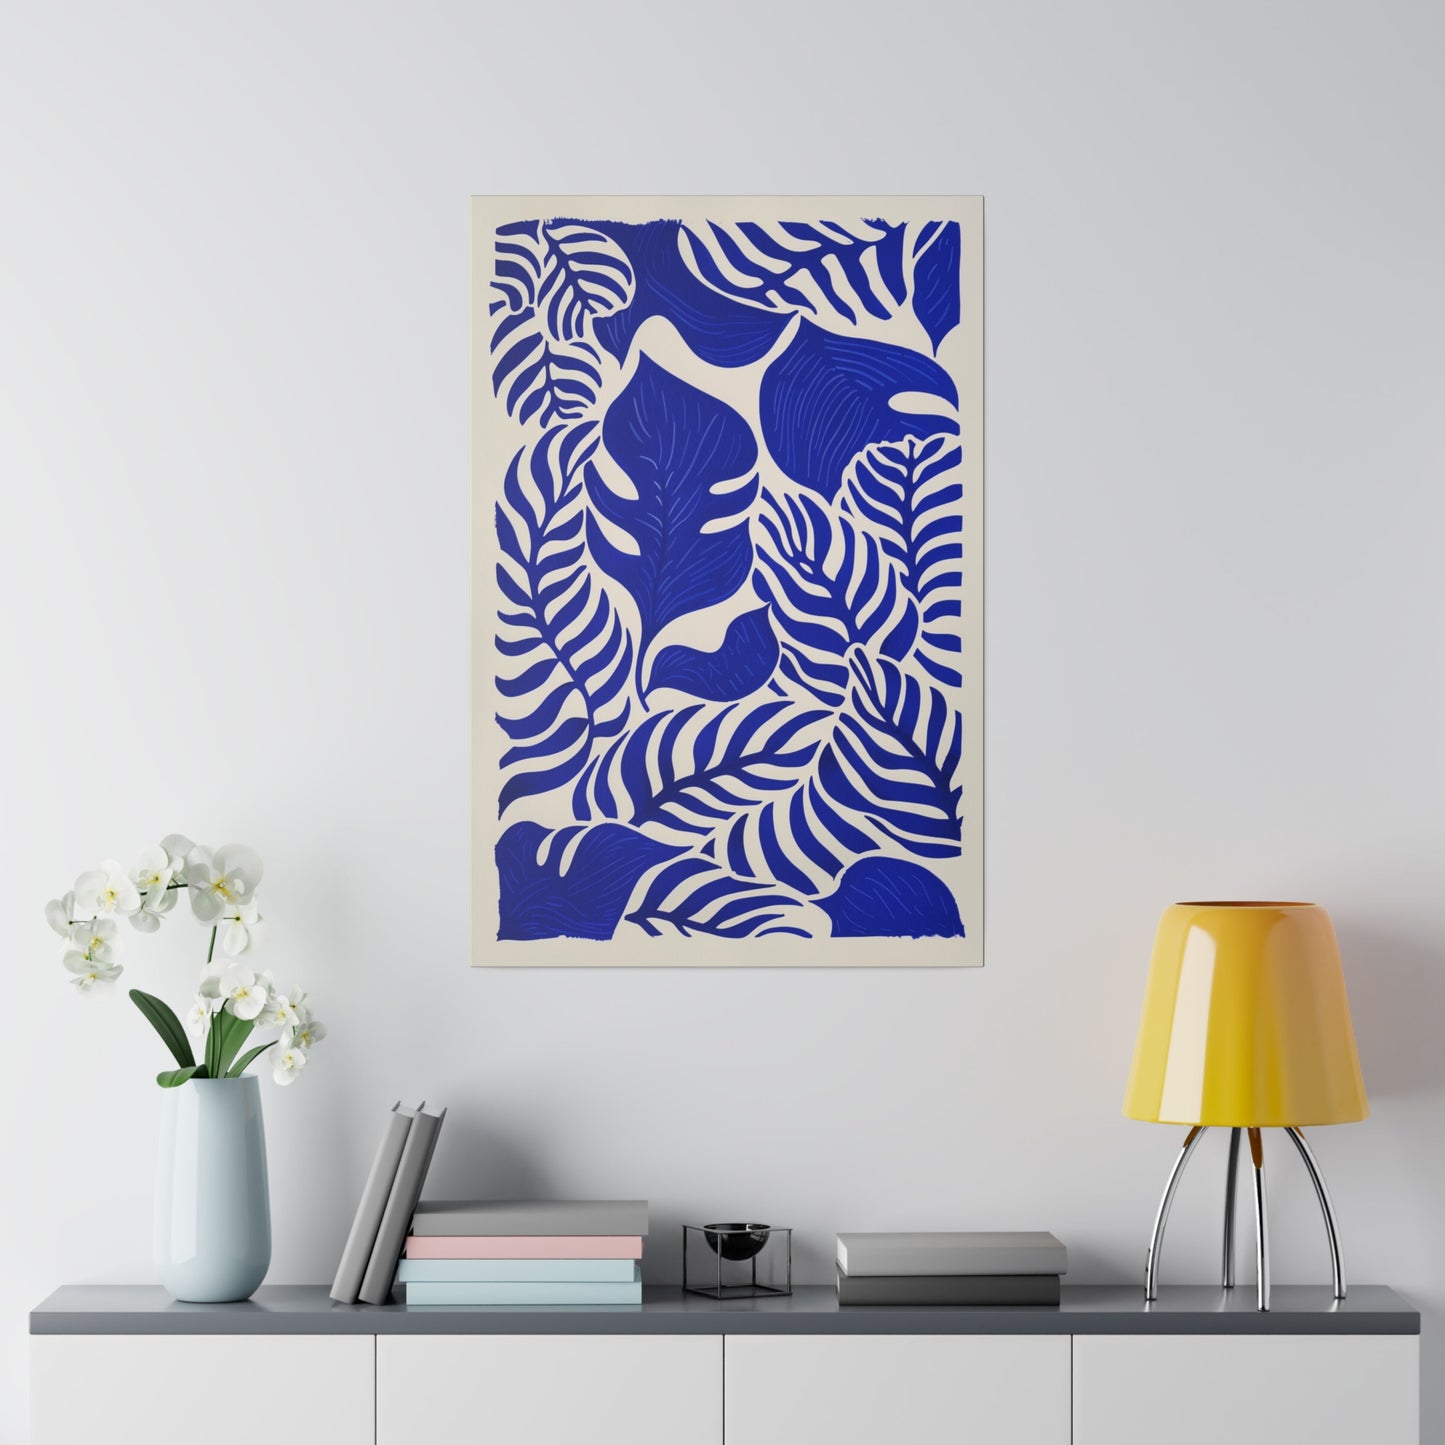 Royal Blue Abstract Canvas Art Gallery Wrap, Vines Cream Wall Print Painting Decor Small Large Hanging Modern Vertical Living Room